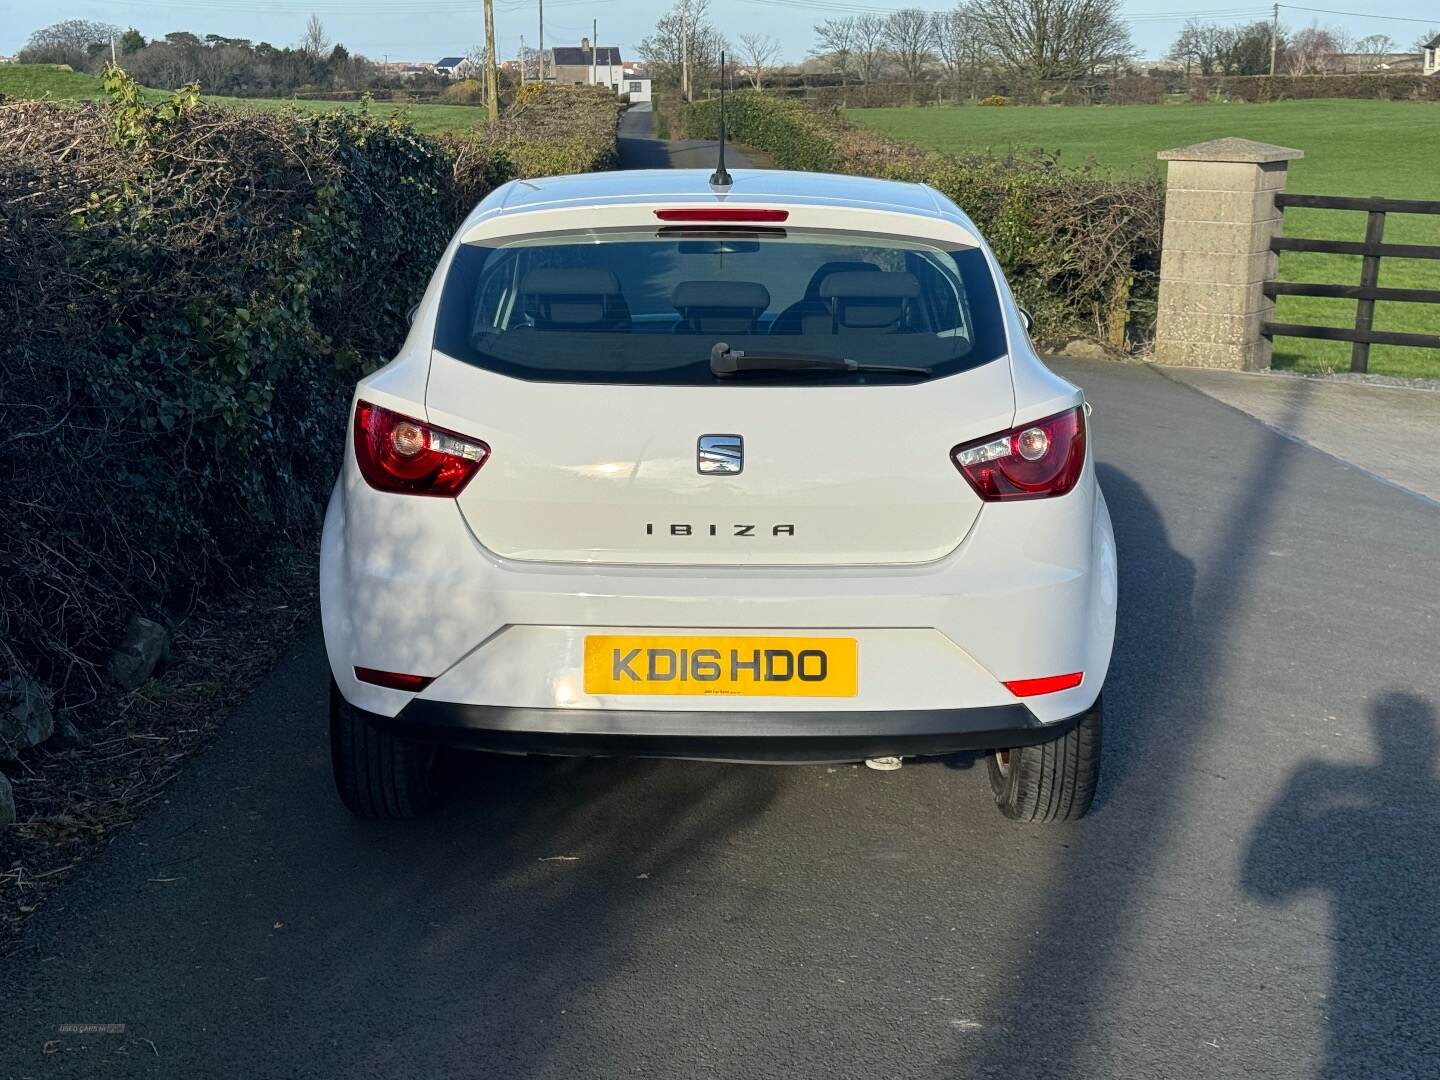 Seat Ibiza SPORT COUPE in Down